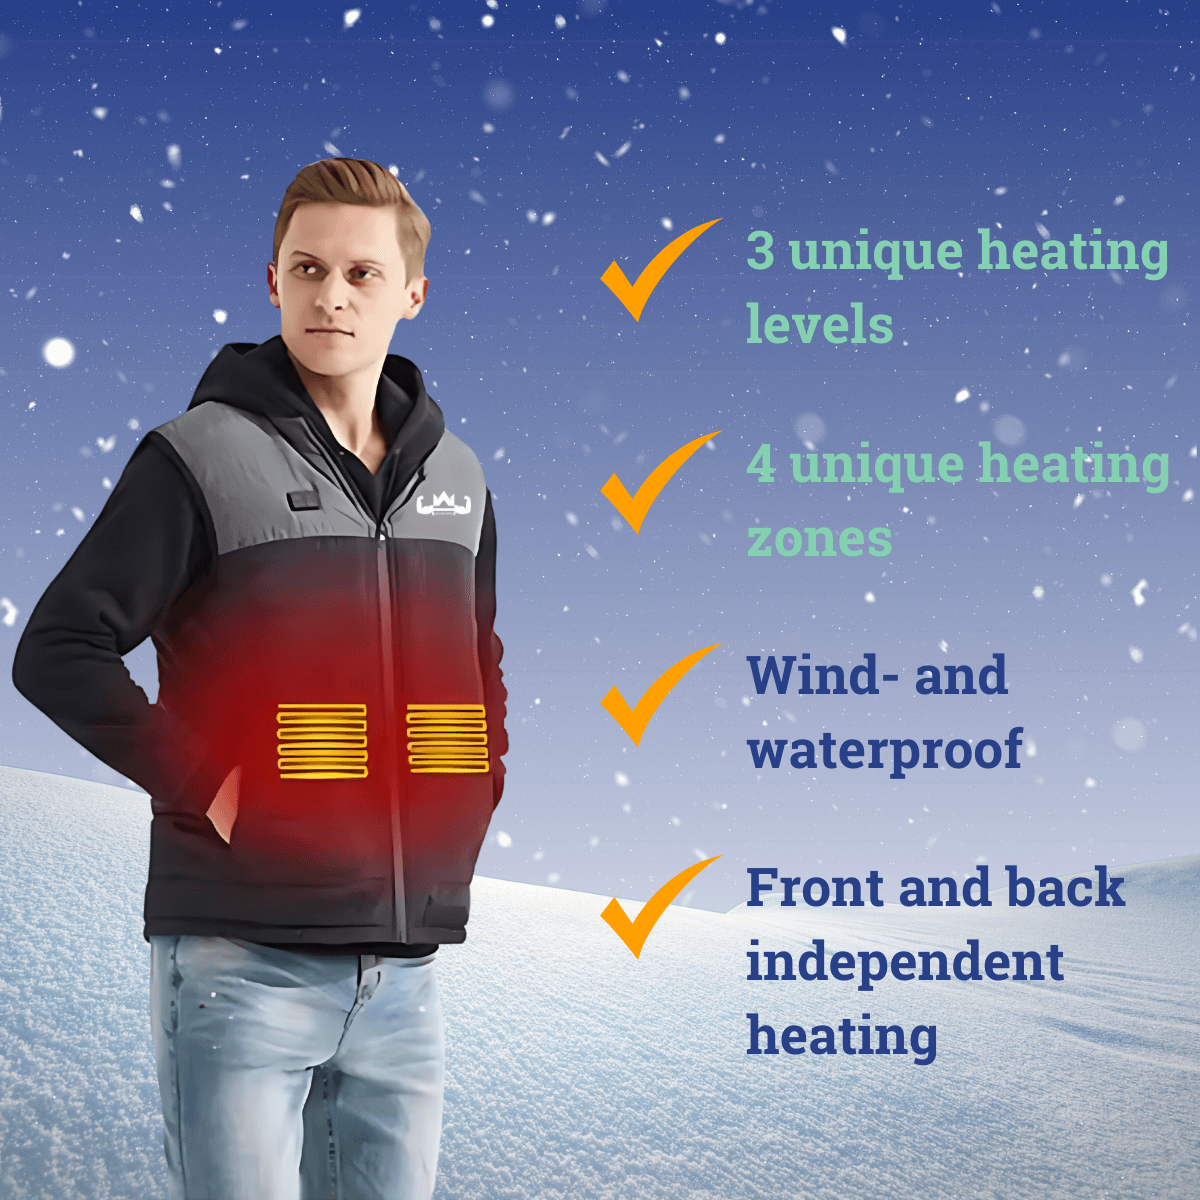 Advantages of the heated vest